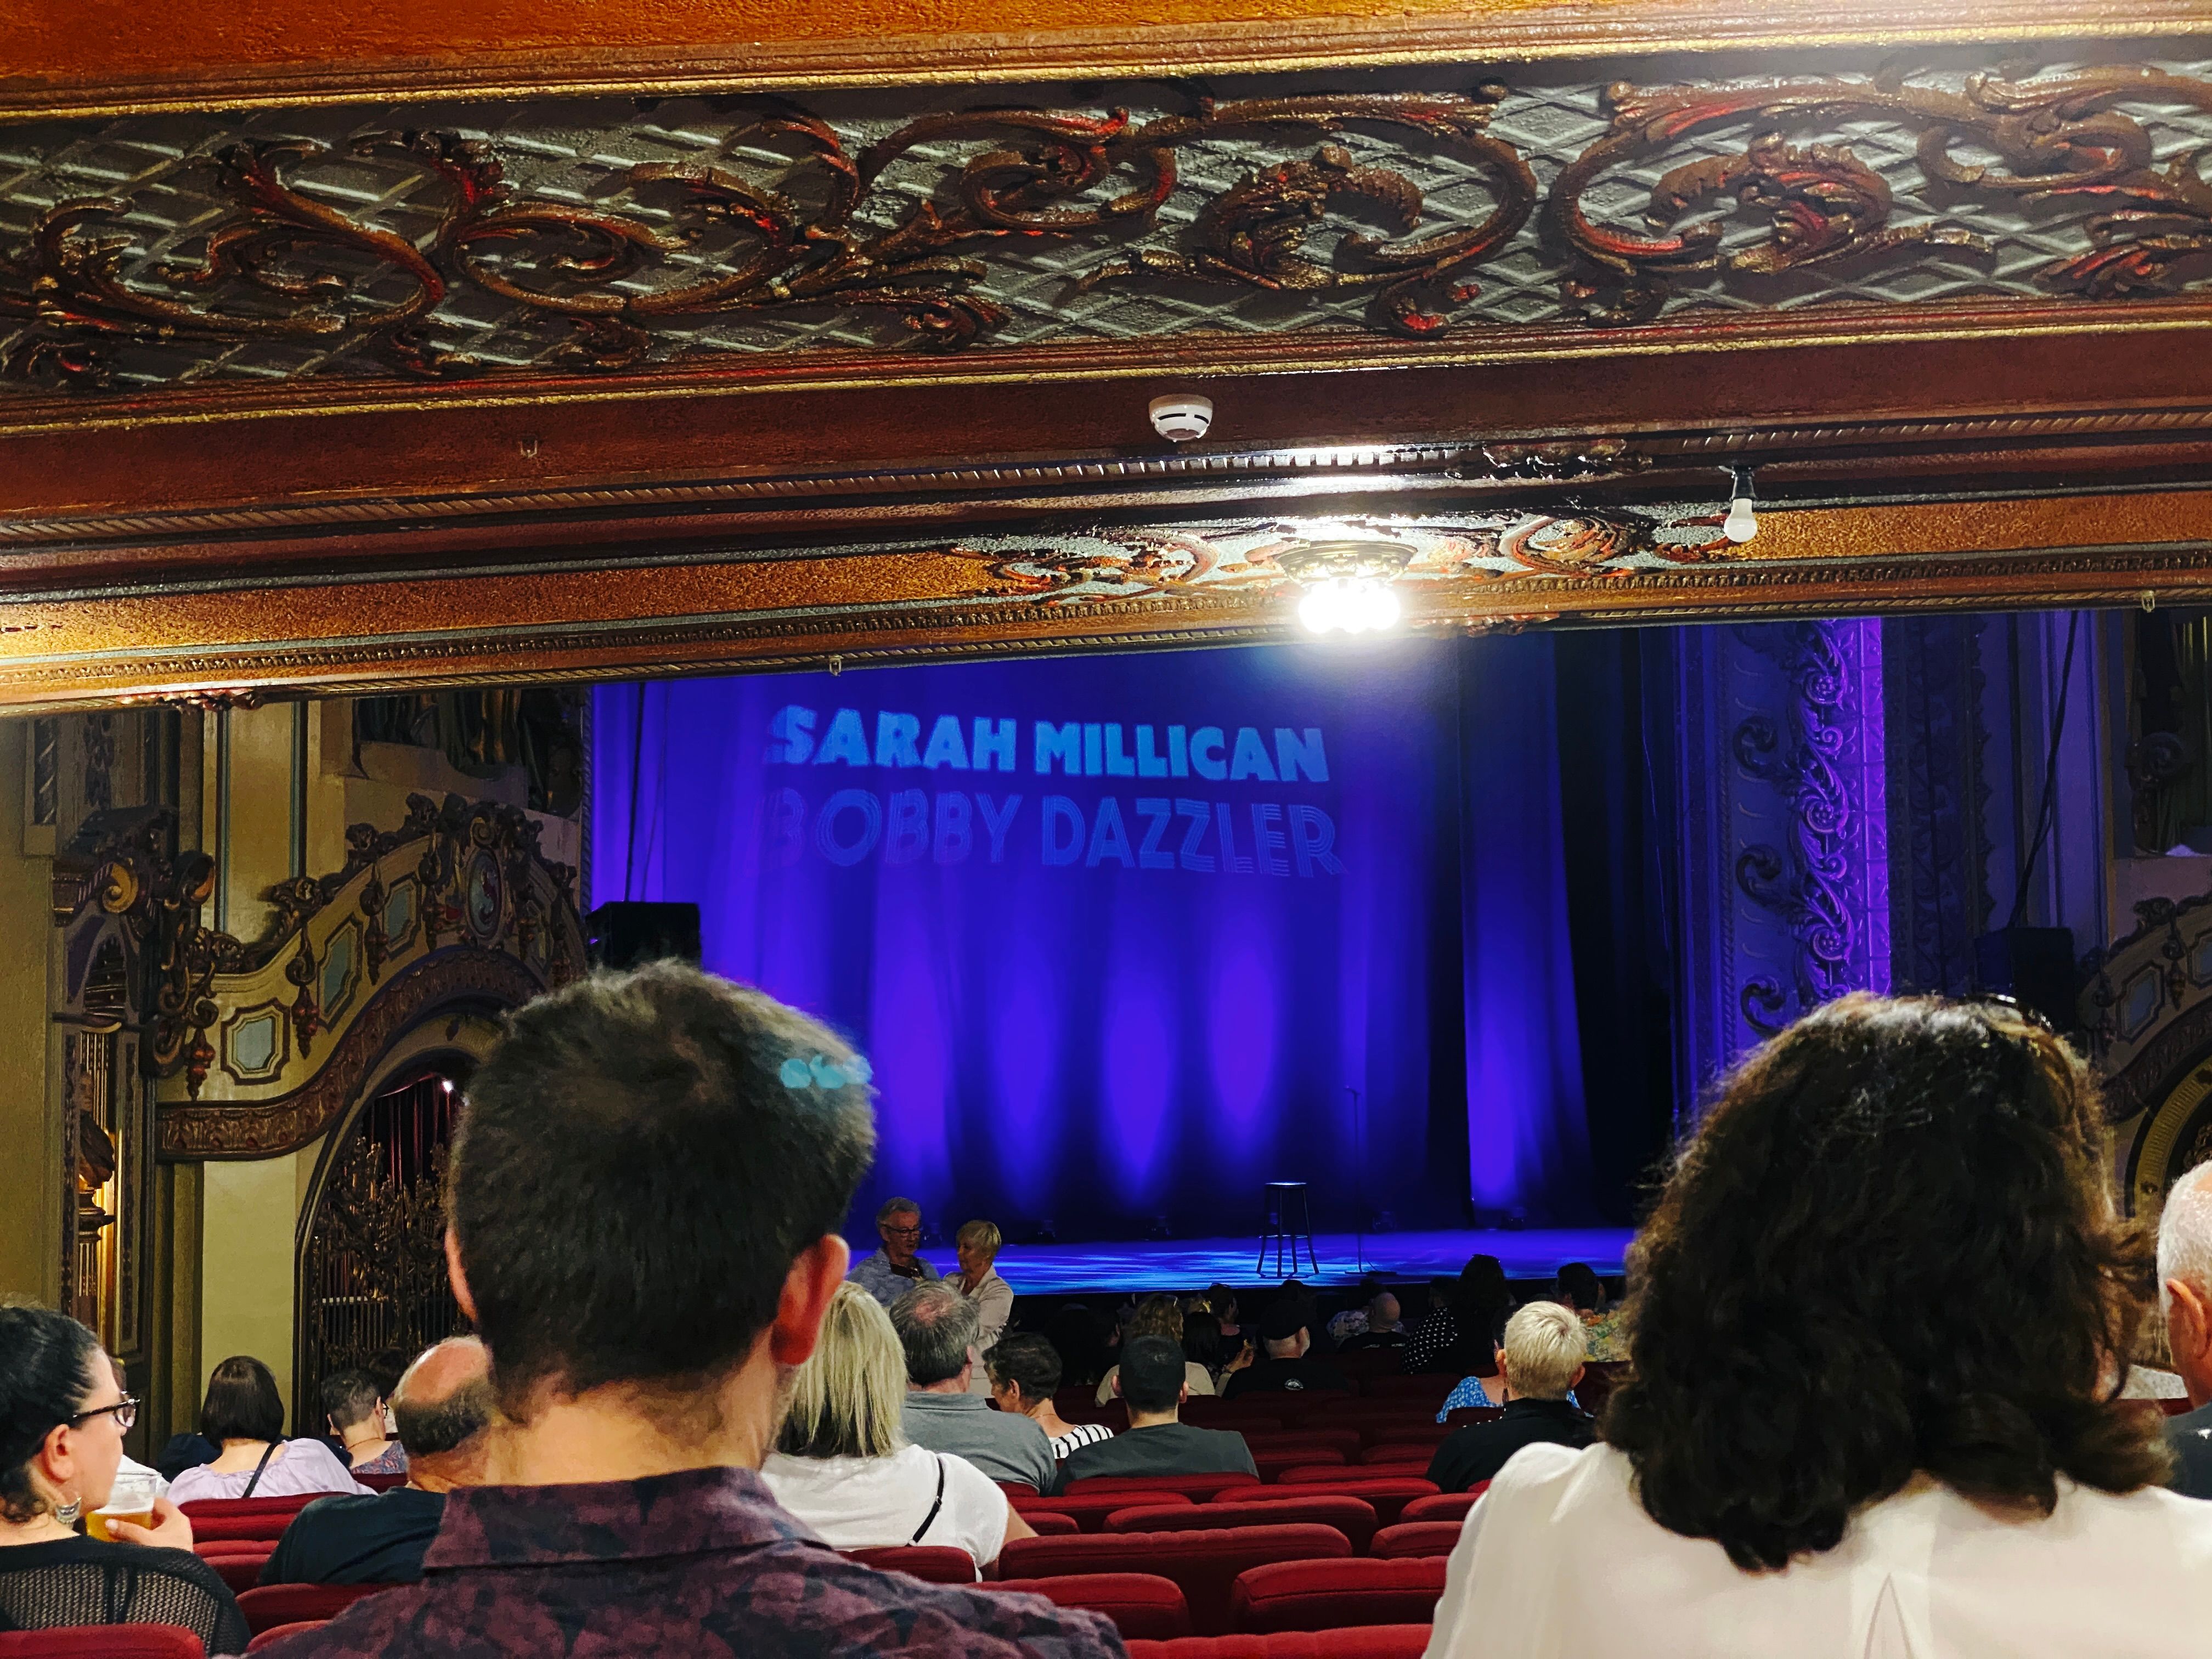 A photo looking towards the stage at Sydney's State Theatre with a big purple backdrop that says in all capitals "SARAH MILLICAN", with dimmer text underneath "BOBBY DAZZLER".